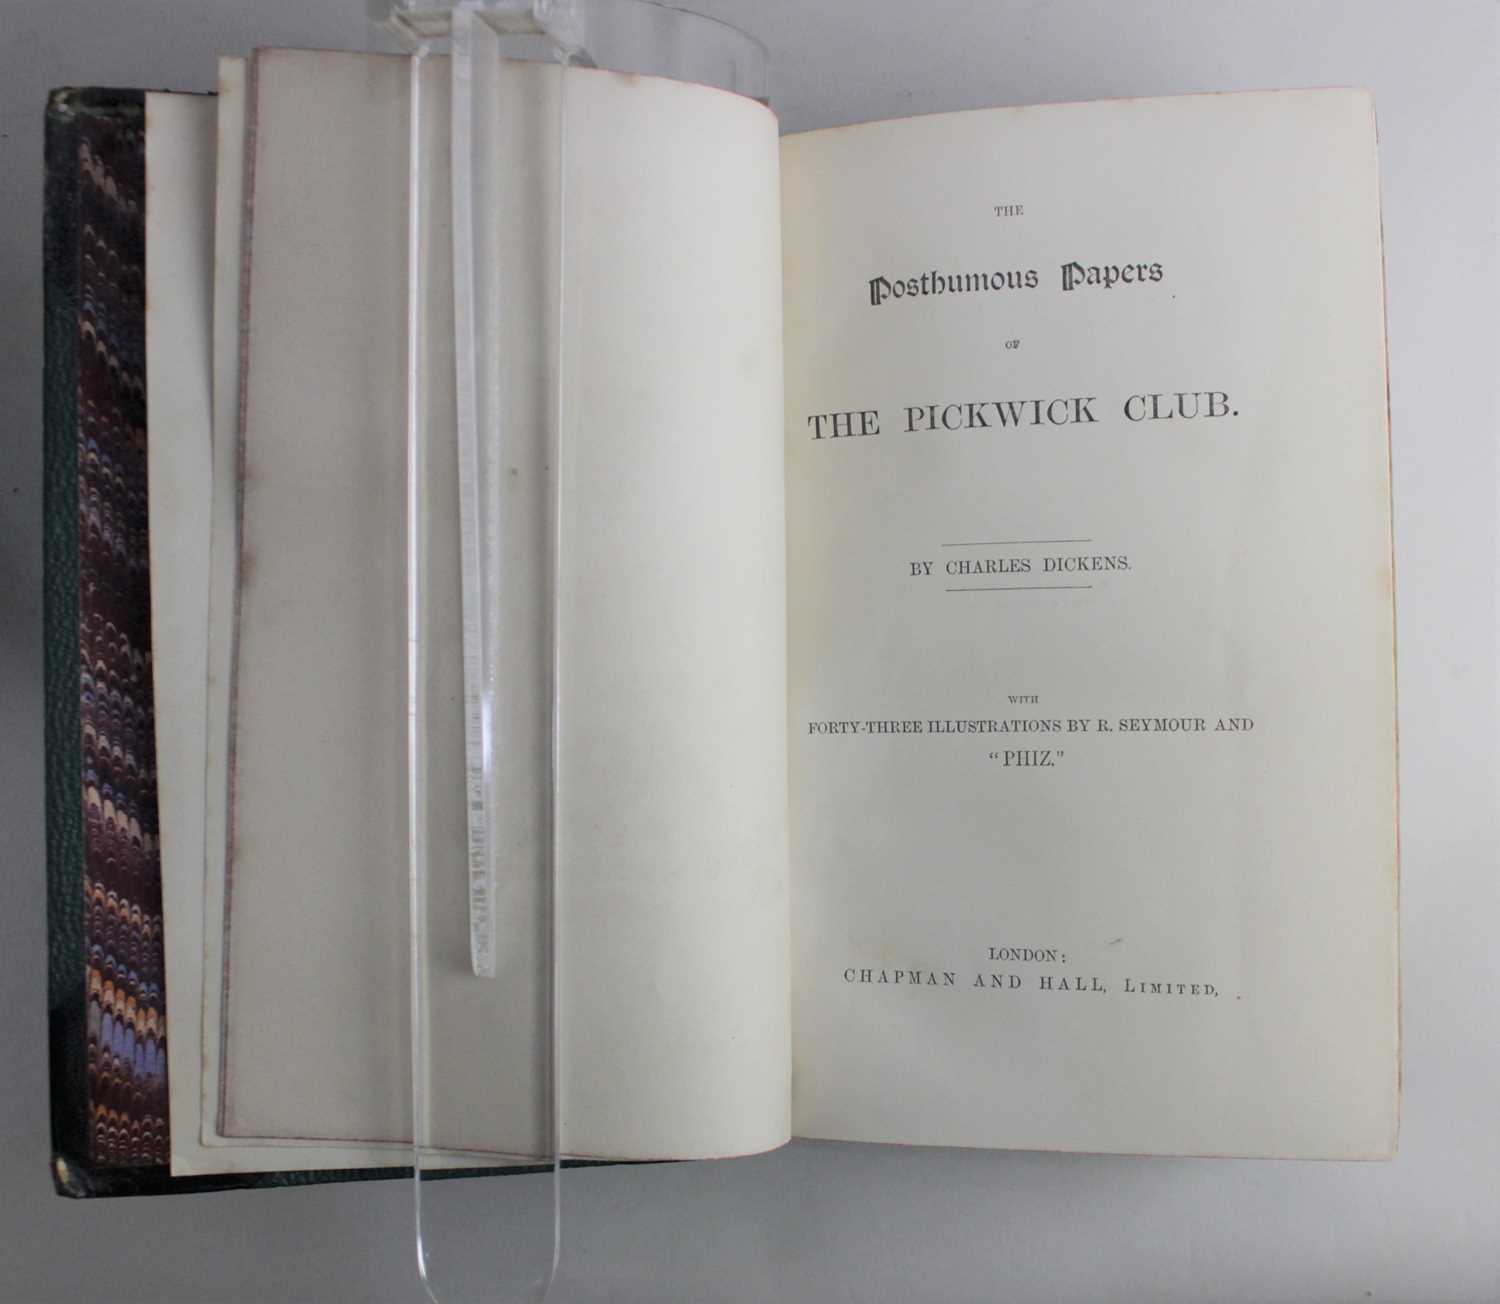 Charles Dickens, seven early volumes including Bleak House, Our Mutual Friend, Dombey and Son with - Image 3 of 5